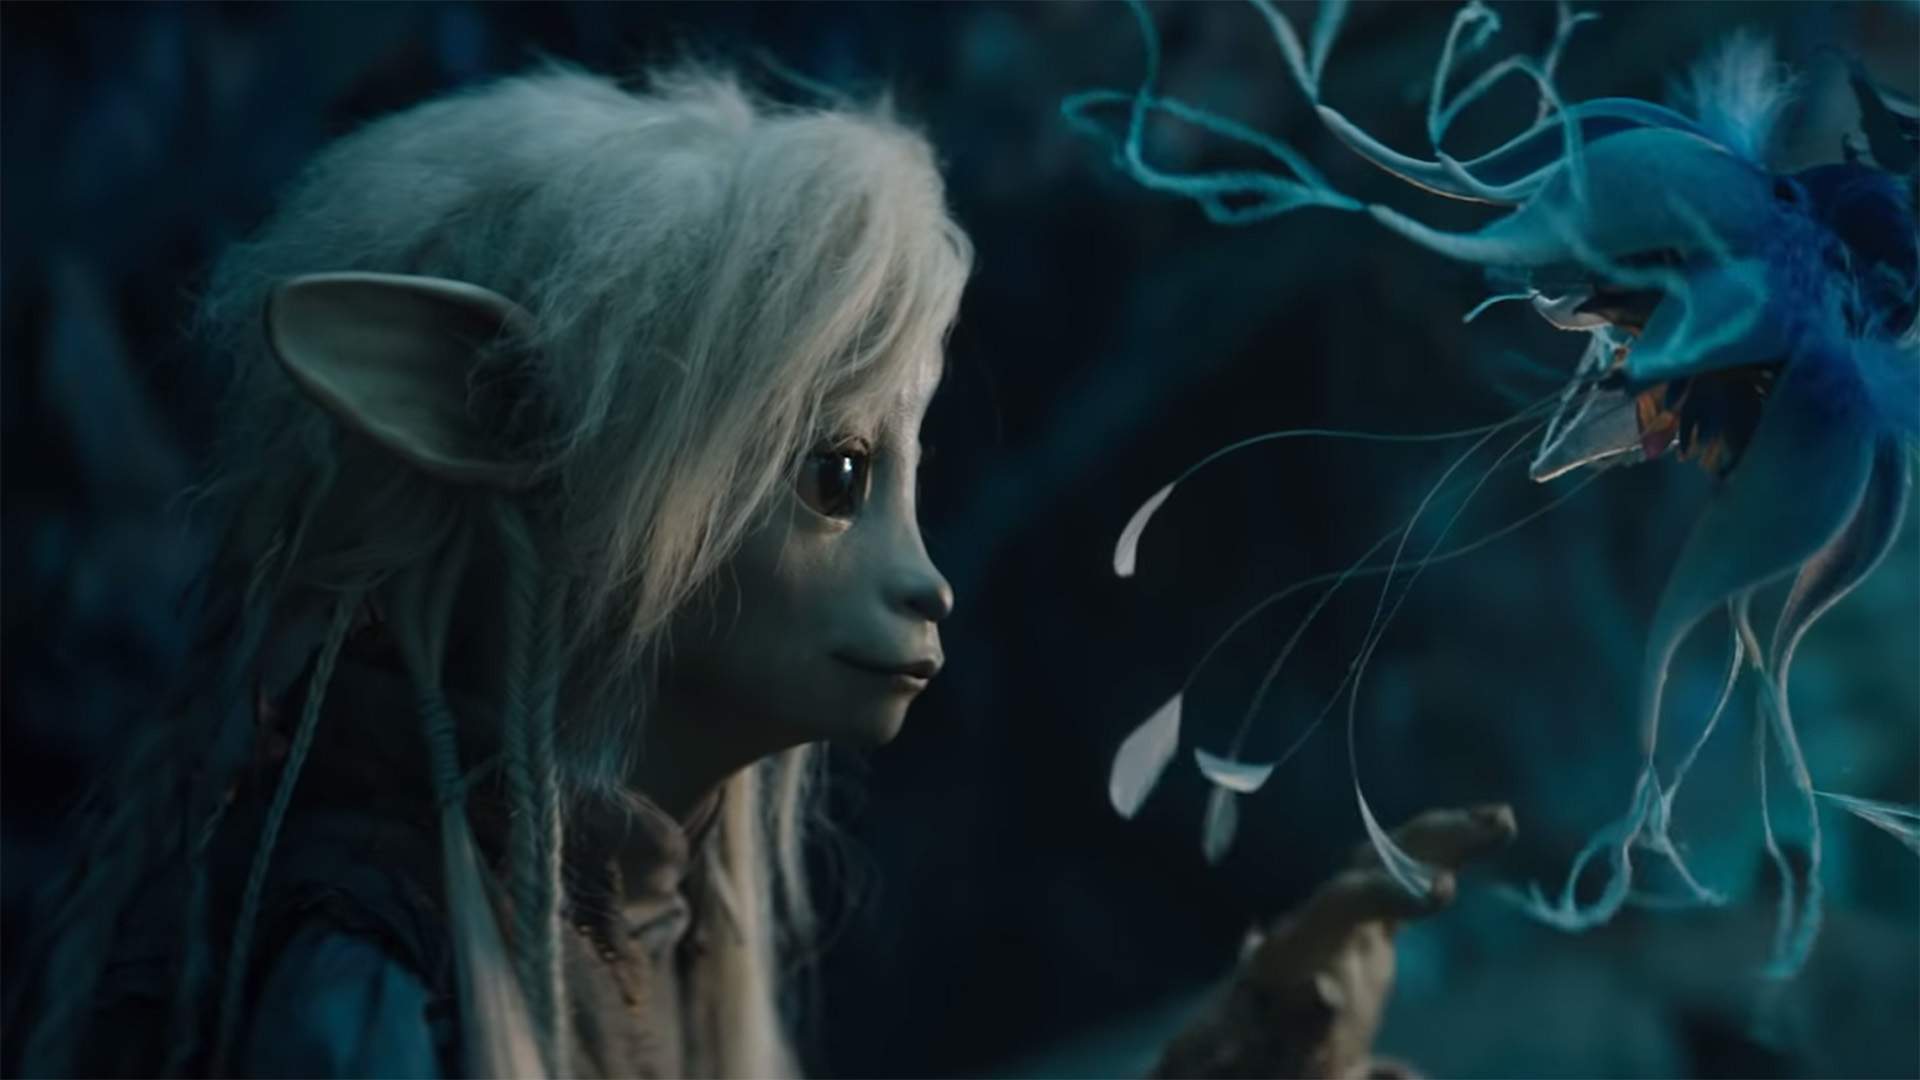 The Visually Stunning First Trailer for Netflix's 'Dark Crystal' Prequel Series Is Here